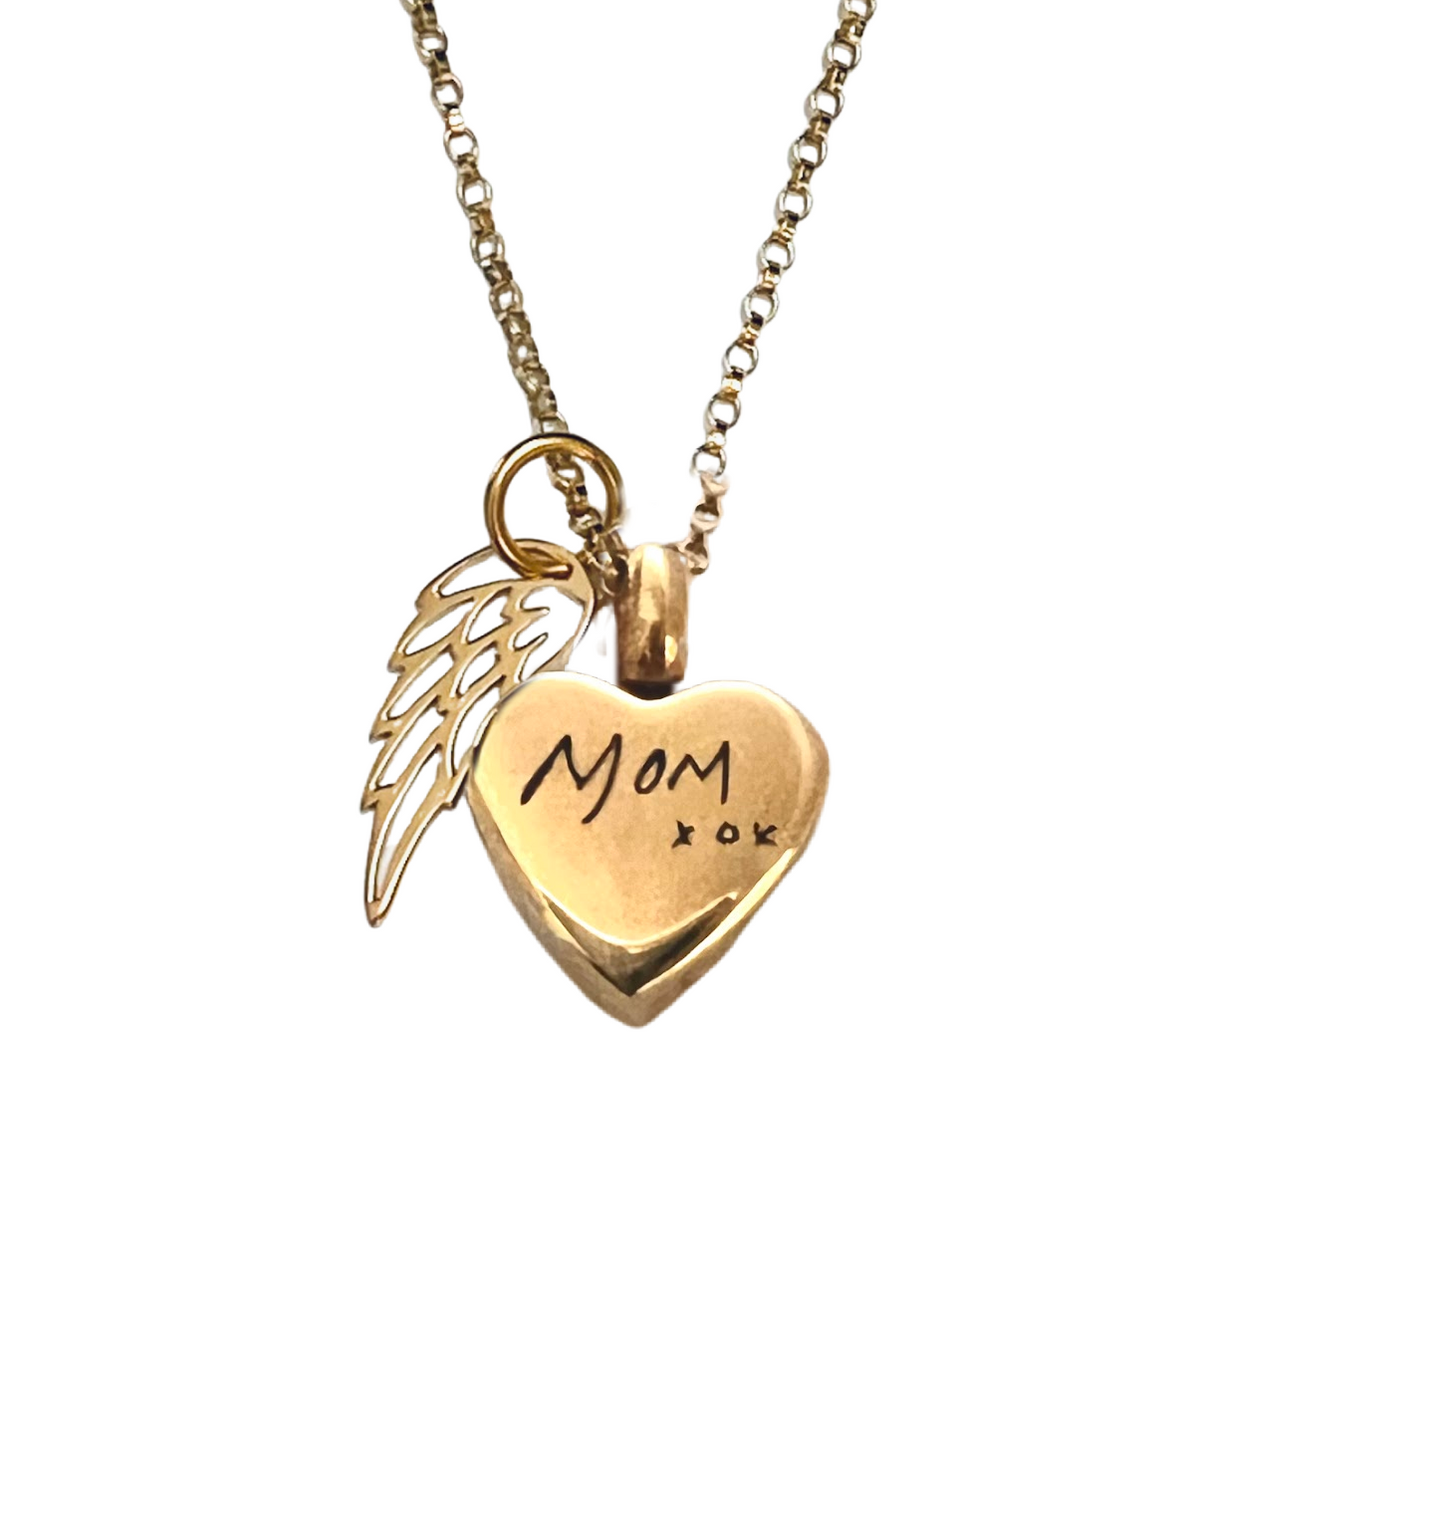 Petite Heart Gold Angel Wing Urn Necklace personalized with optional fingerprint